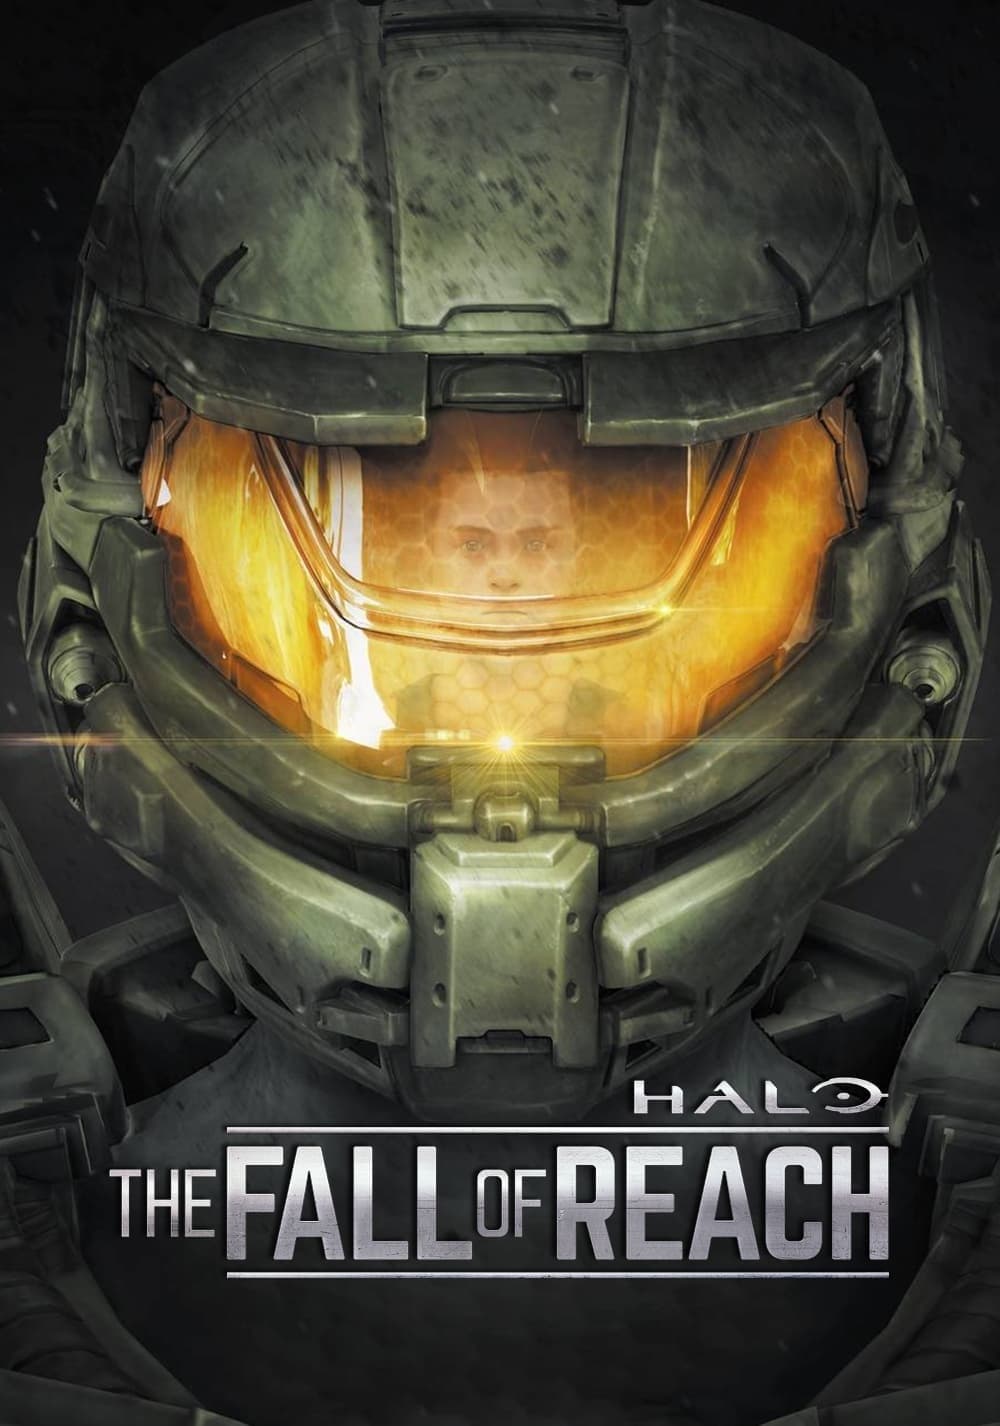 Halo The Fall of Reach (2015)